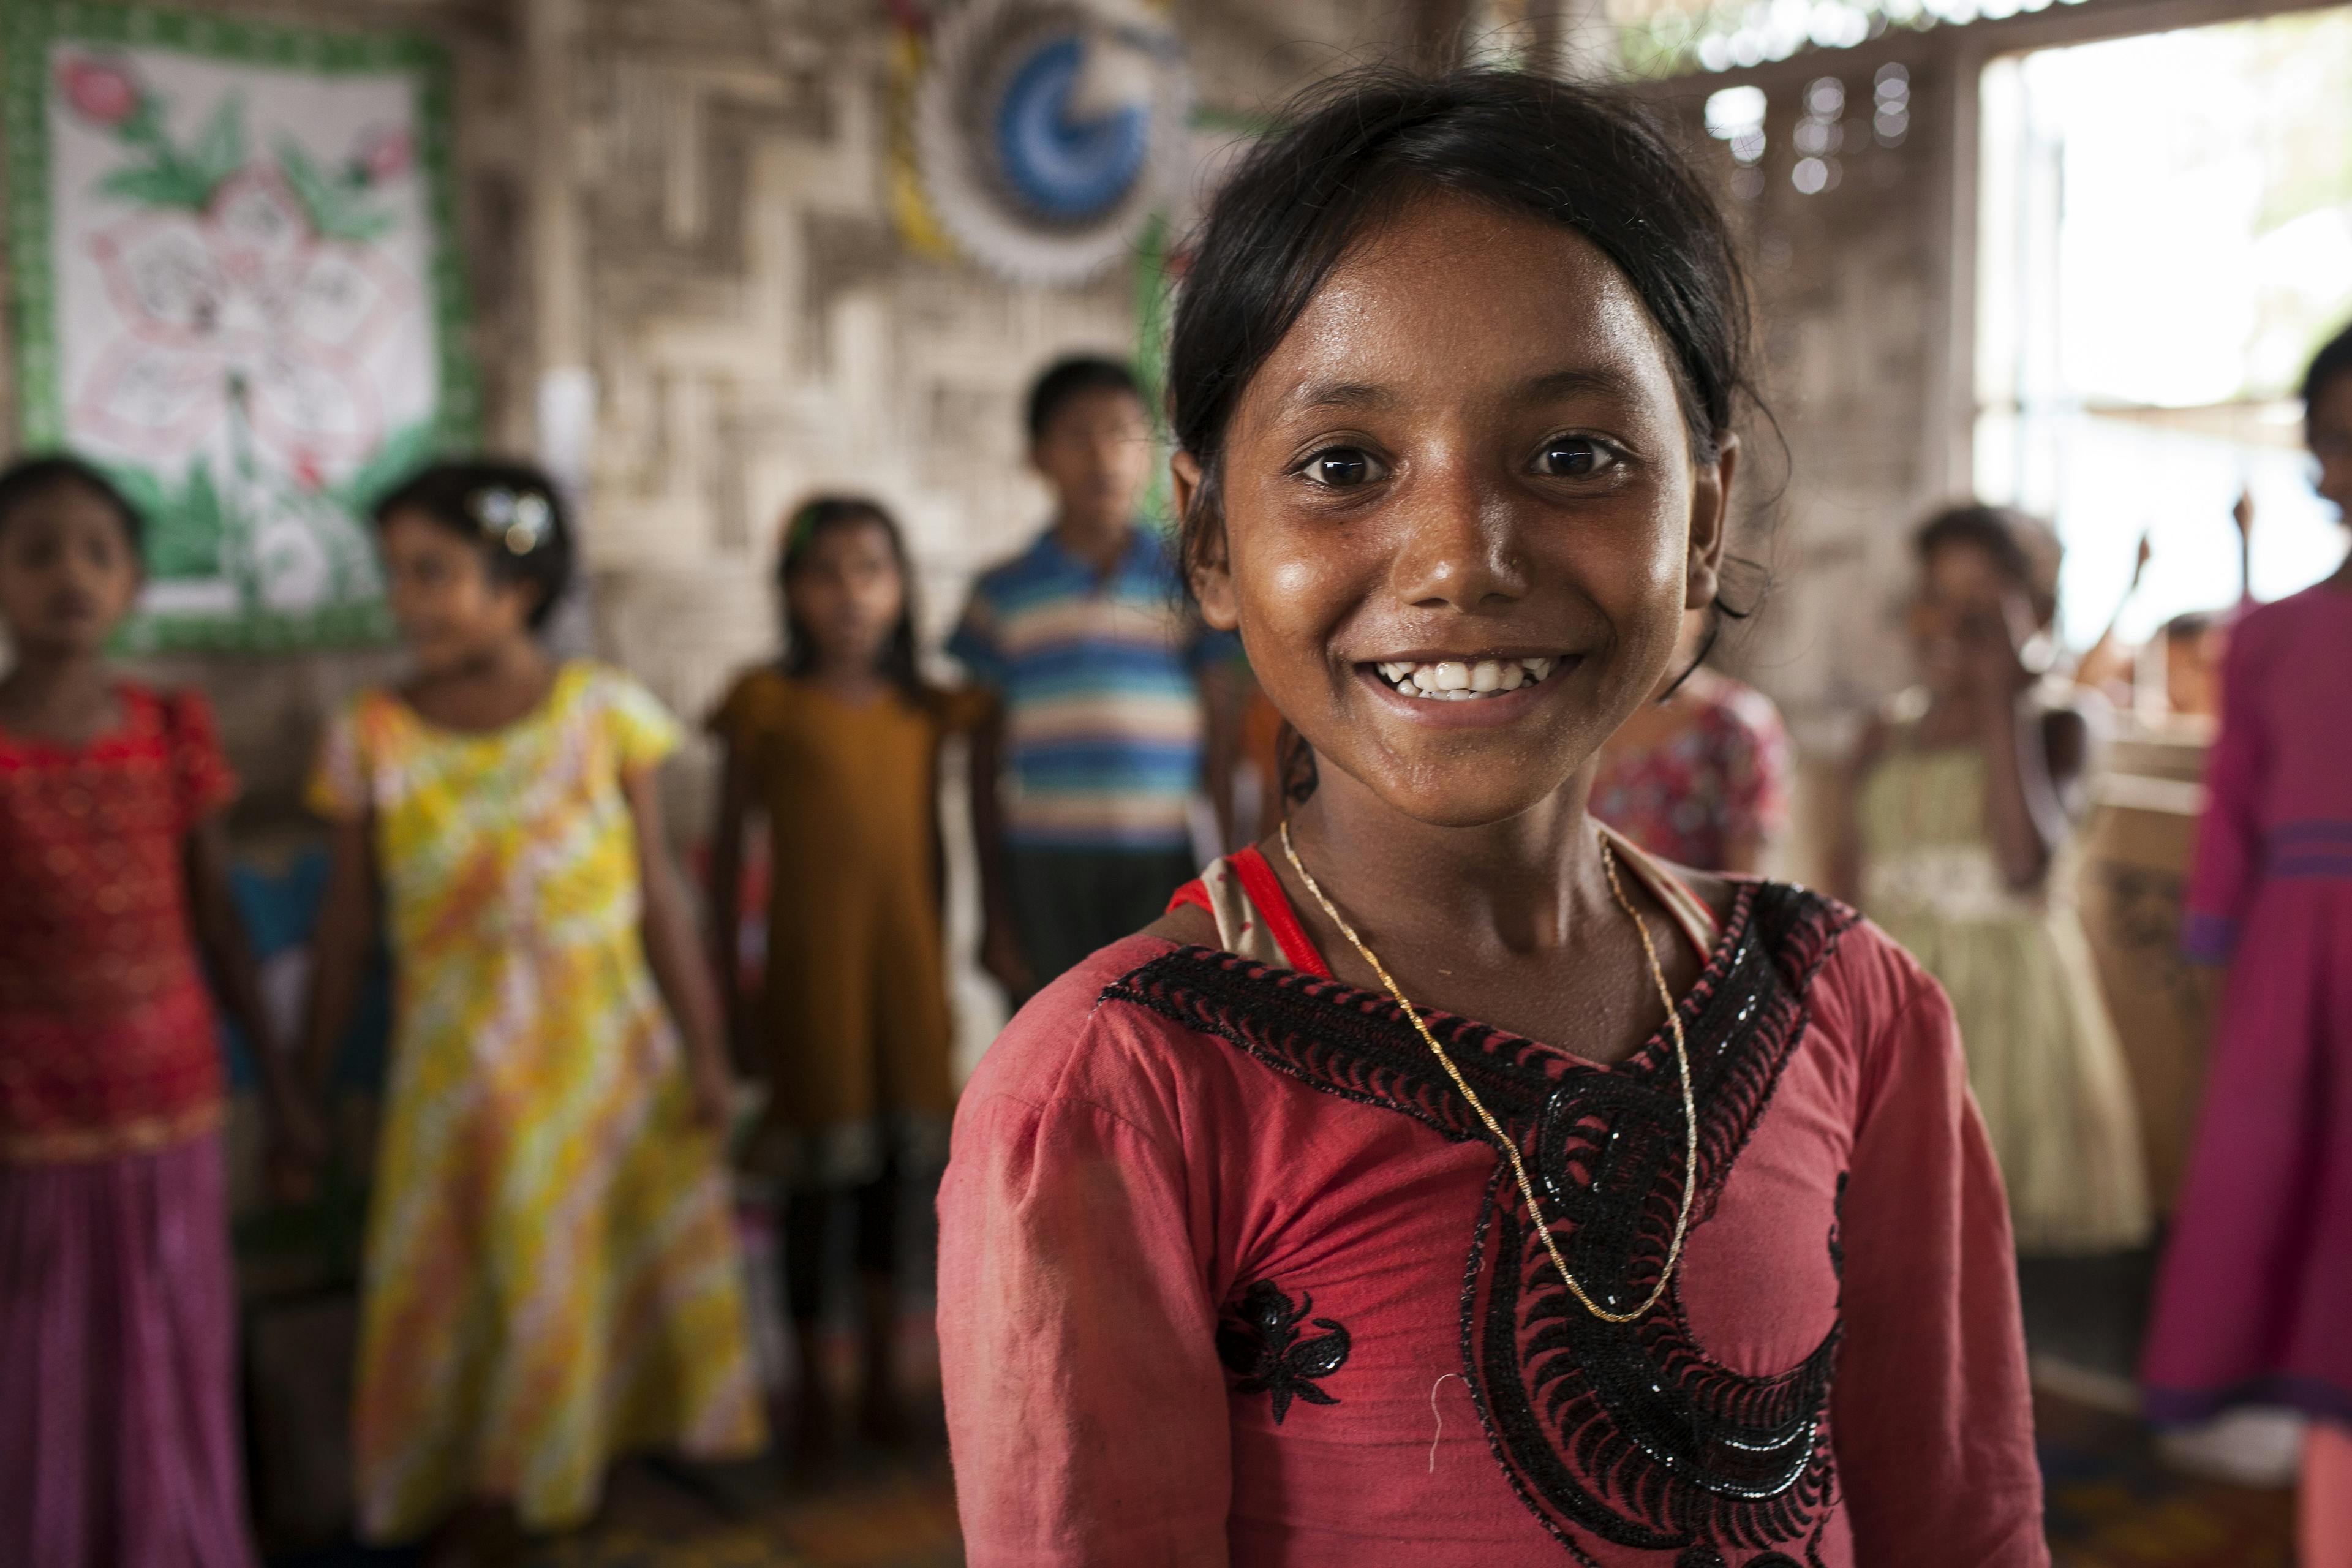 Sehera (10) is a Rohingya refugee living in a make-shift camp in Bangladesh. She enjoys attending a UNICEF supported child learning centre - where she can learn, play and recover from trauma.